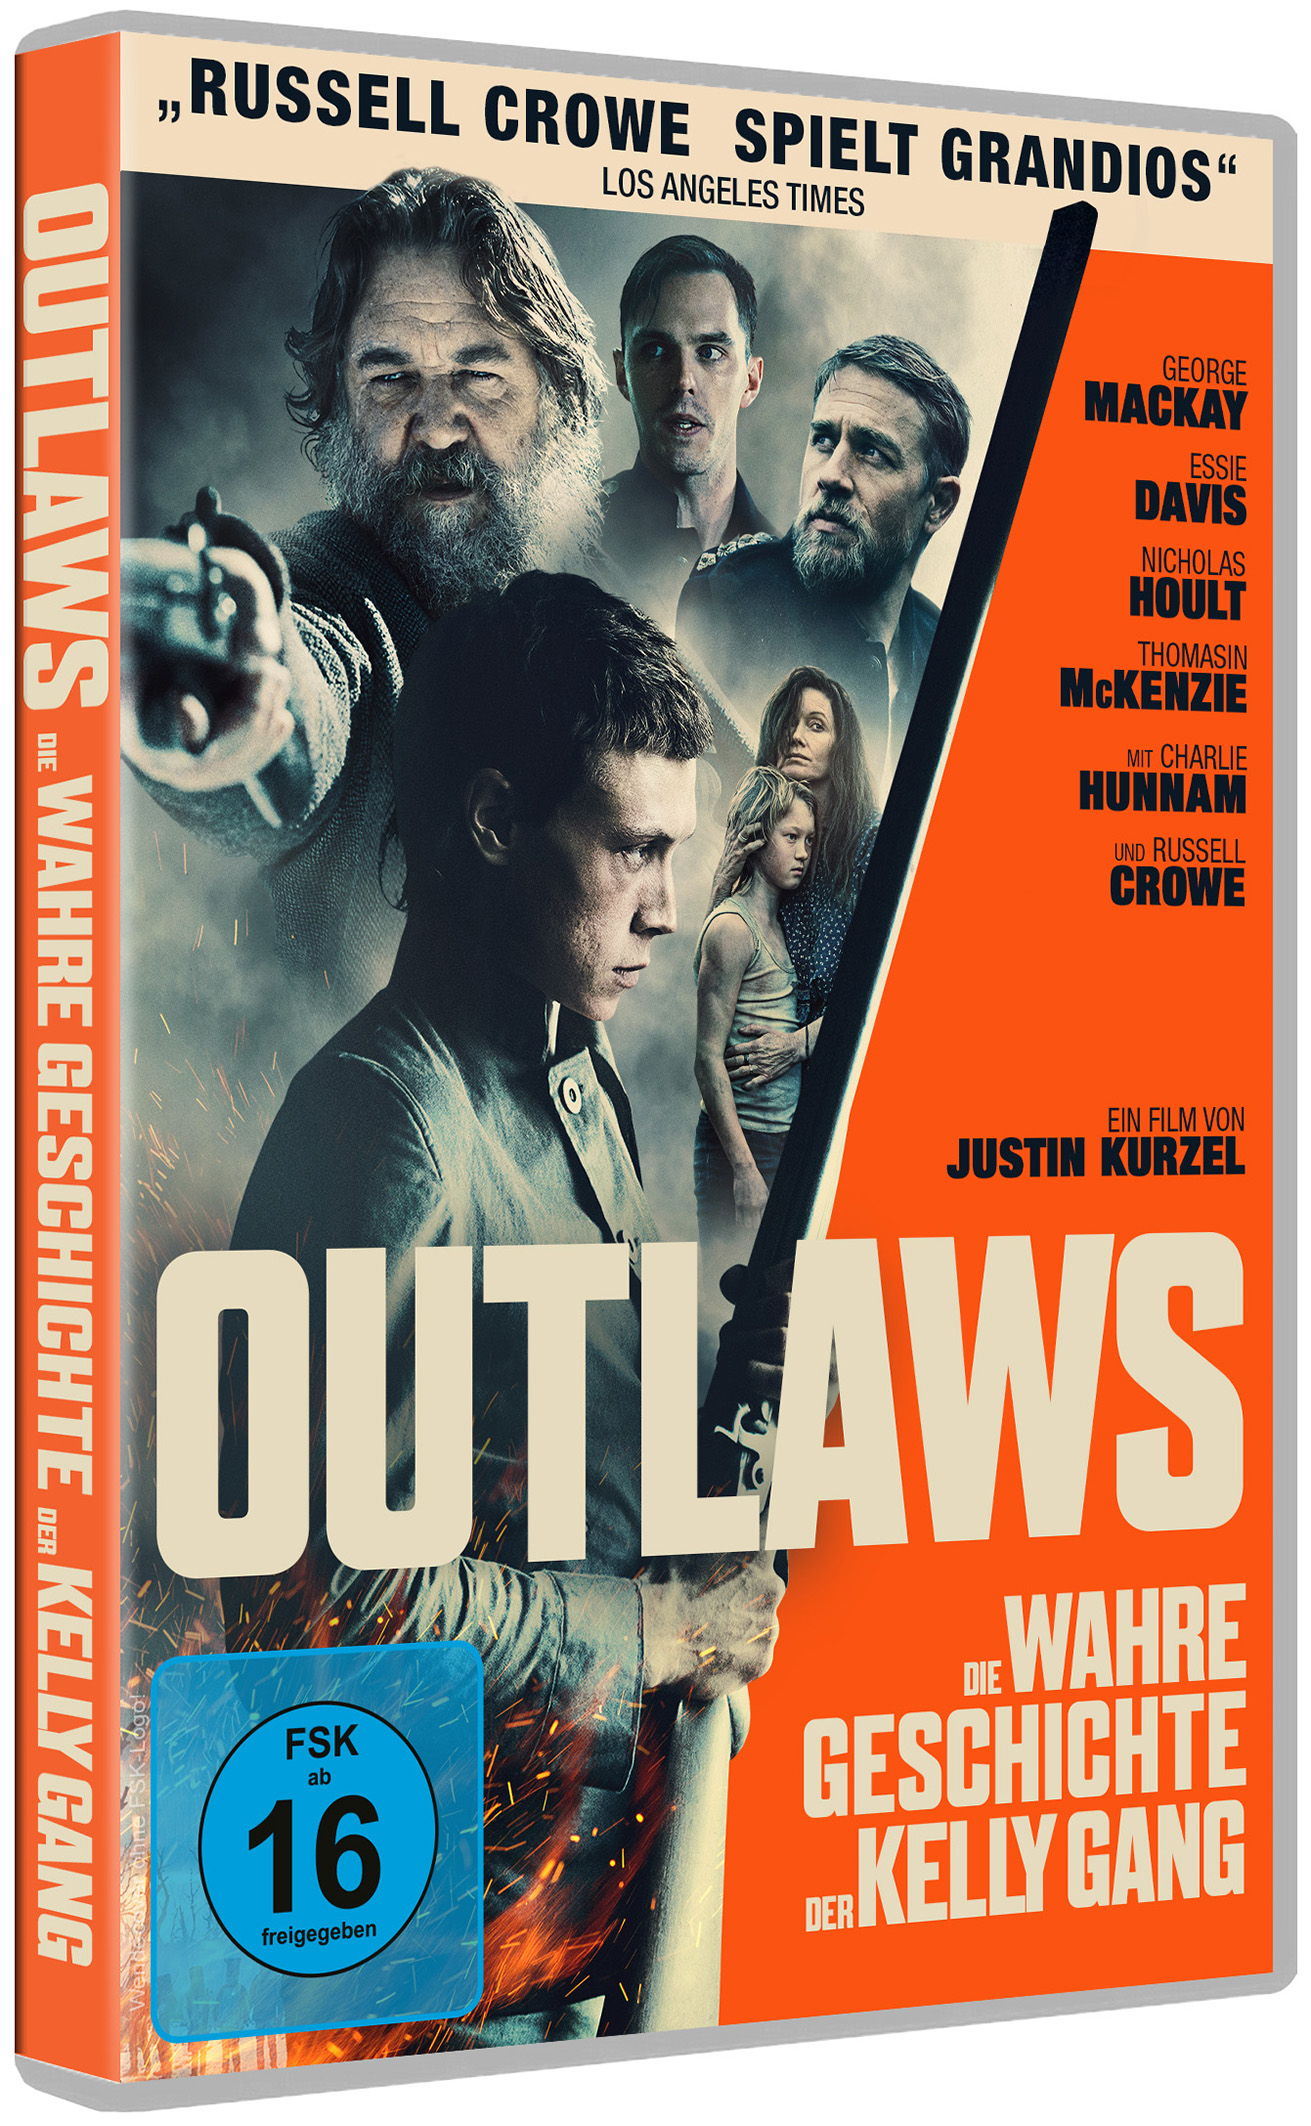 Outlaws-D.wahre Ges.d.Kelly Gang (DVD)  Image 2